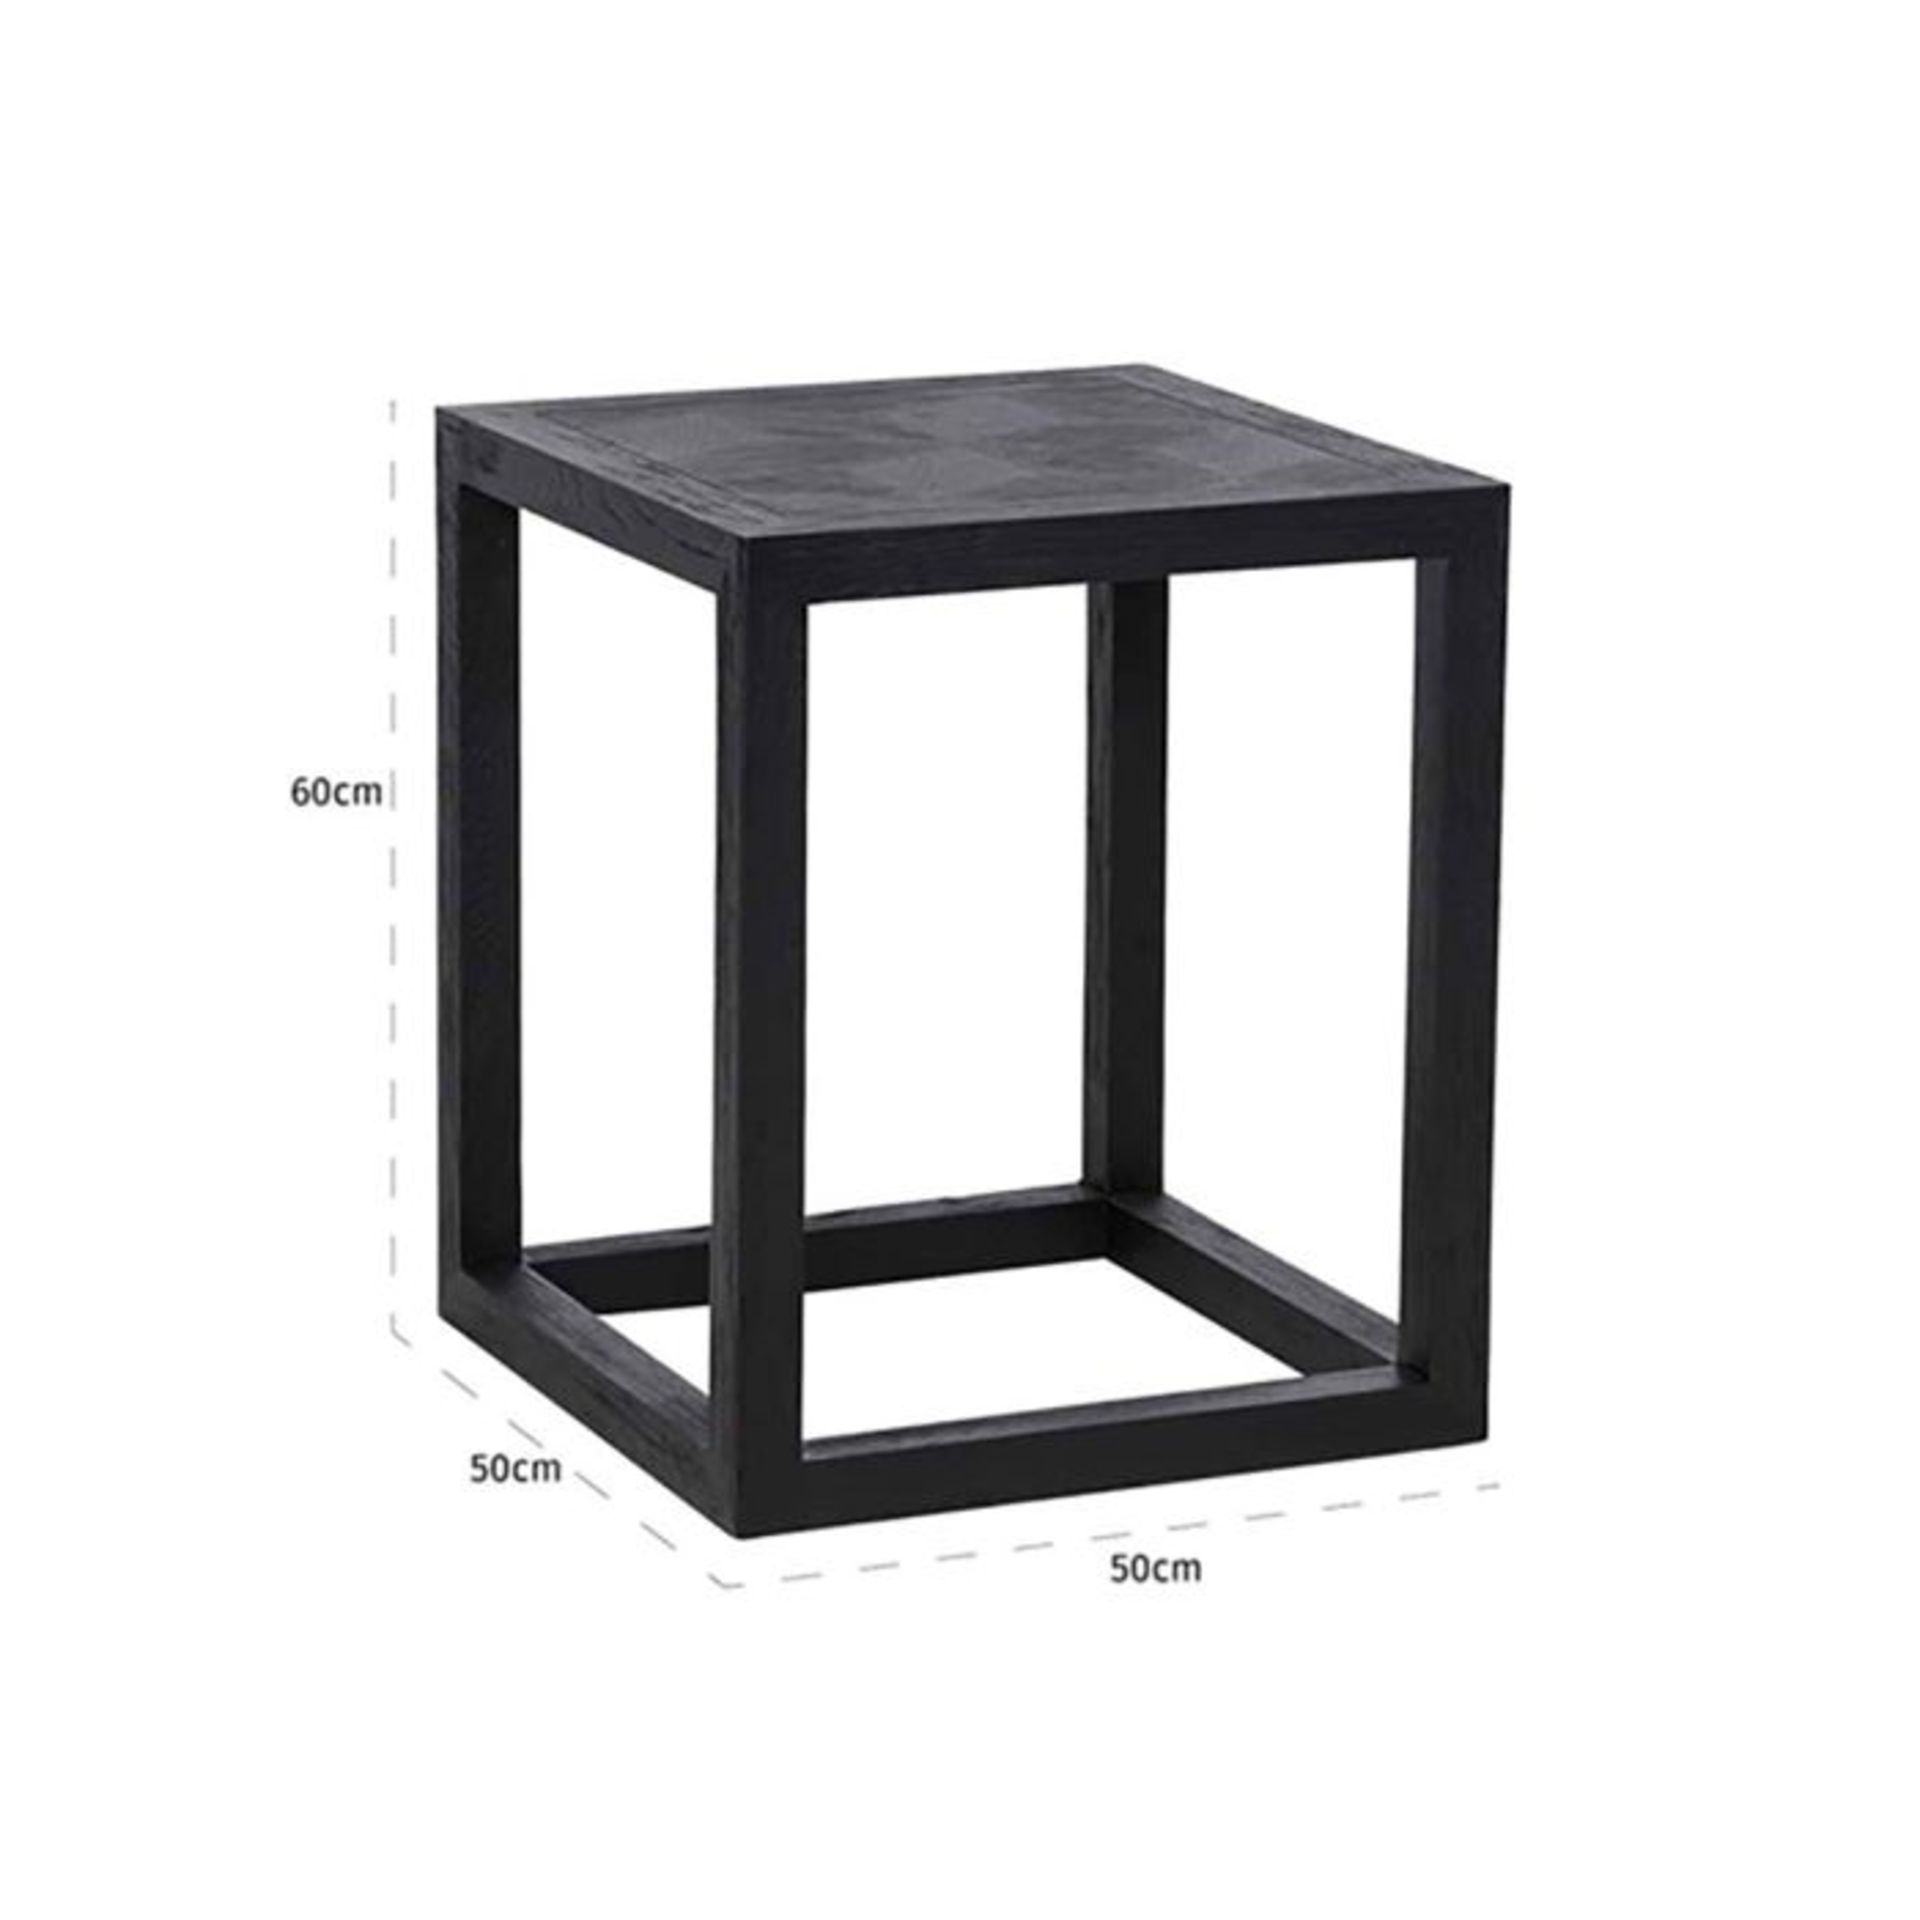 Moot Group Richmond Blax Black Side Table RRP £586.00 - Image 2 of 6